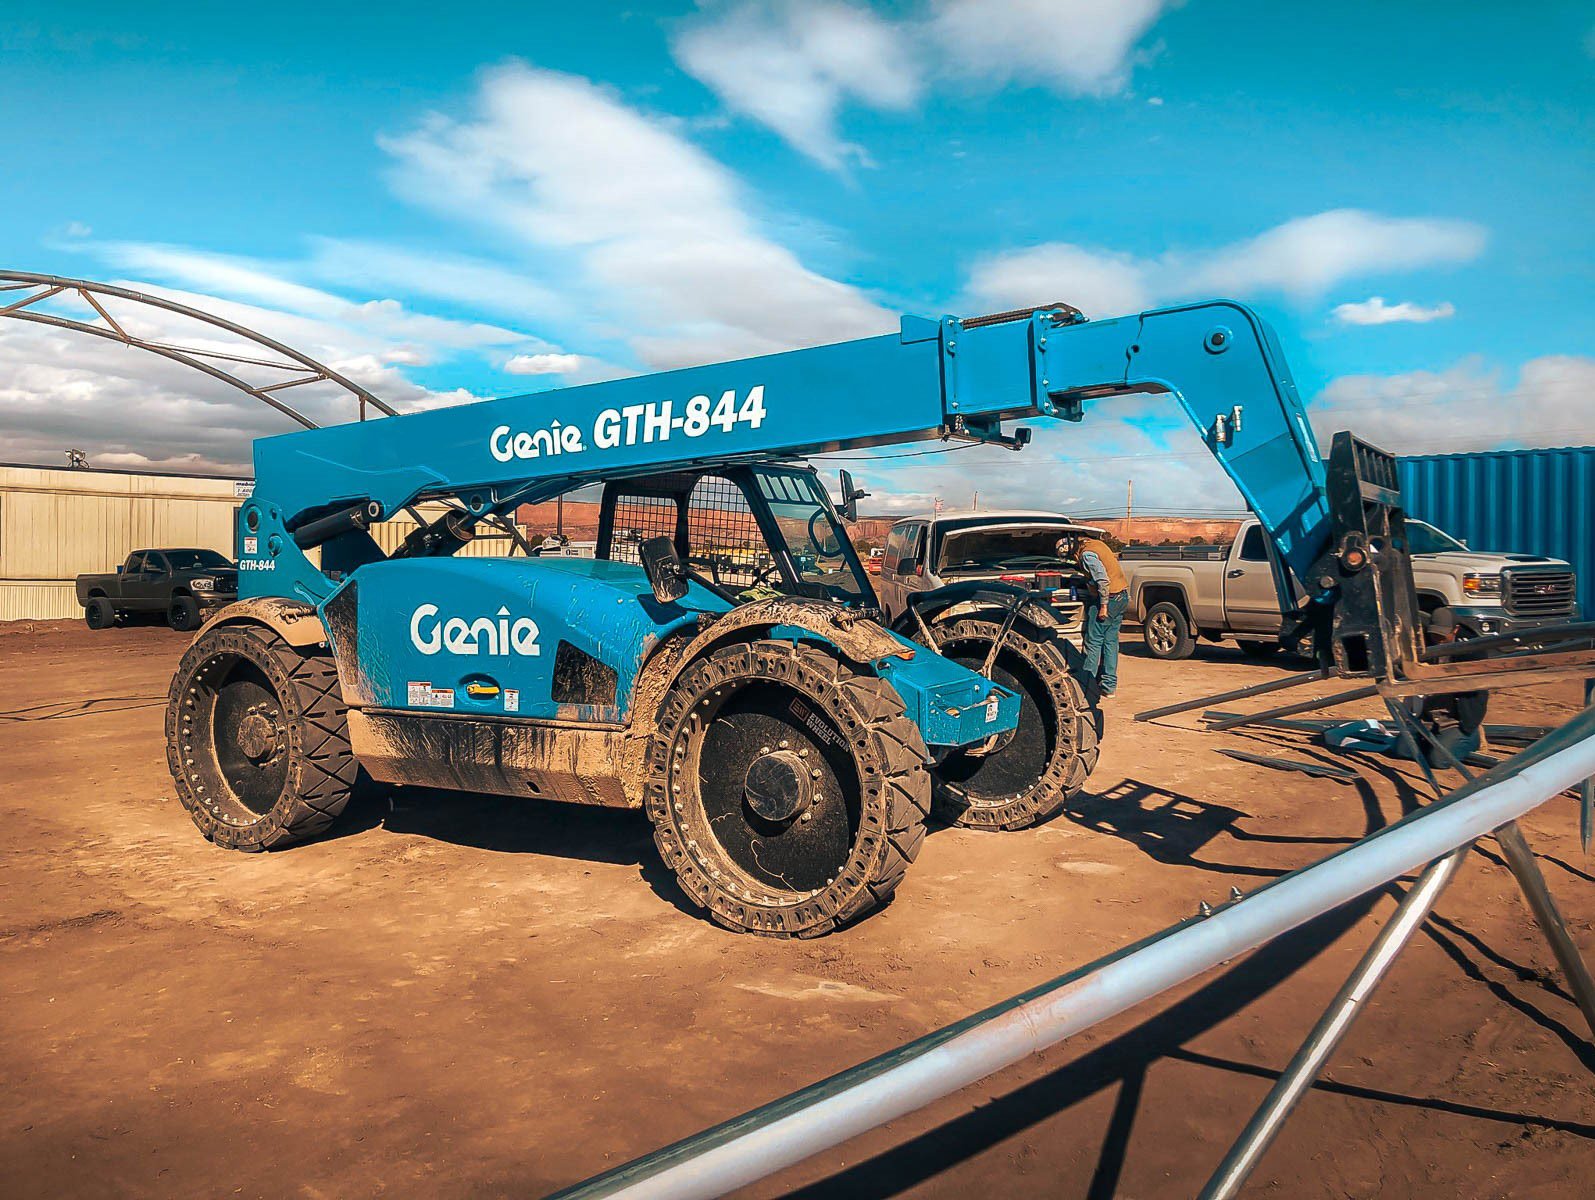 This picture shows our Gradall tires on a blue Genie telehandler